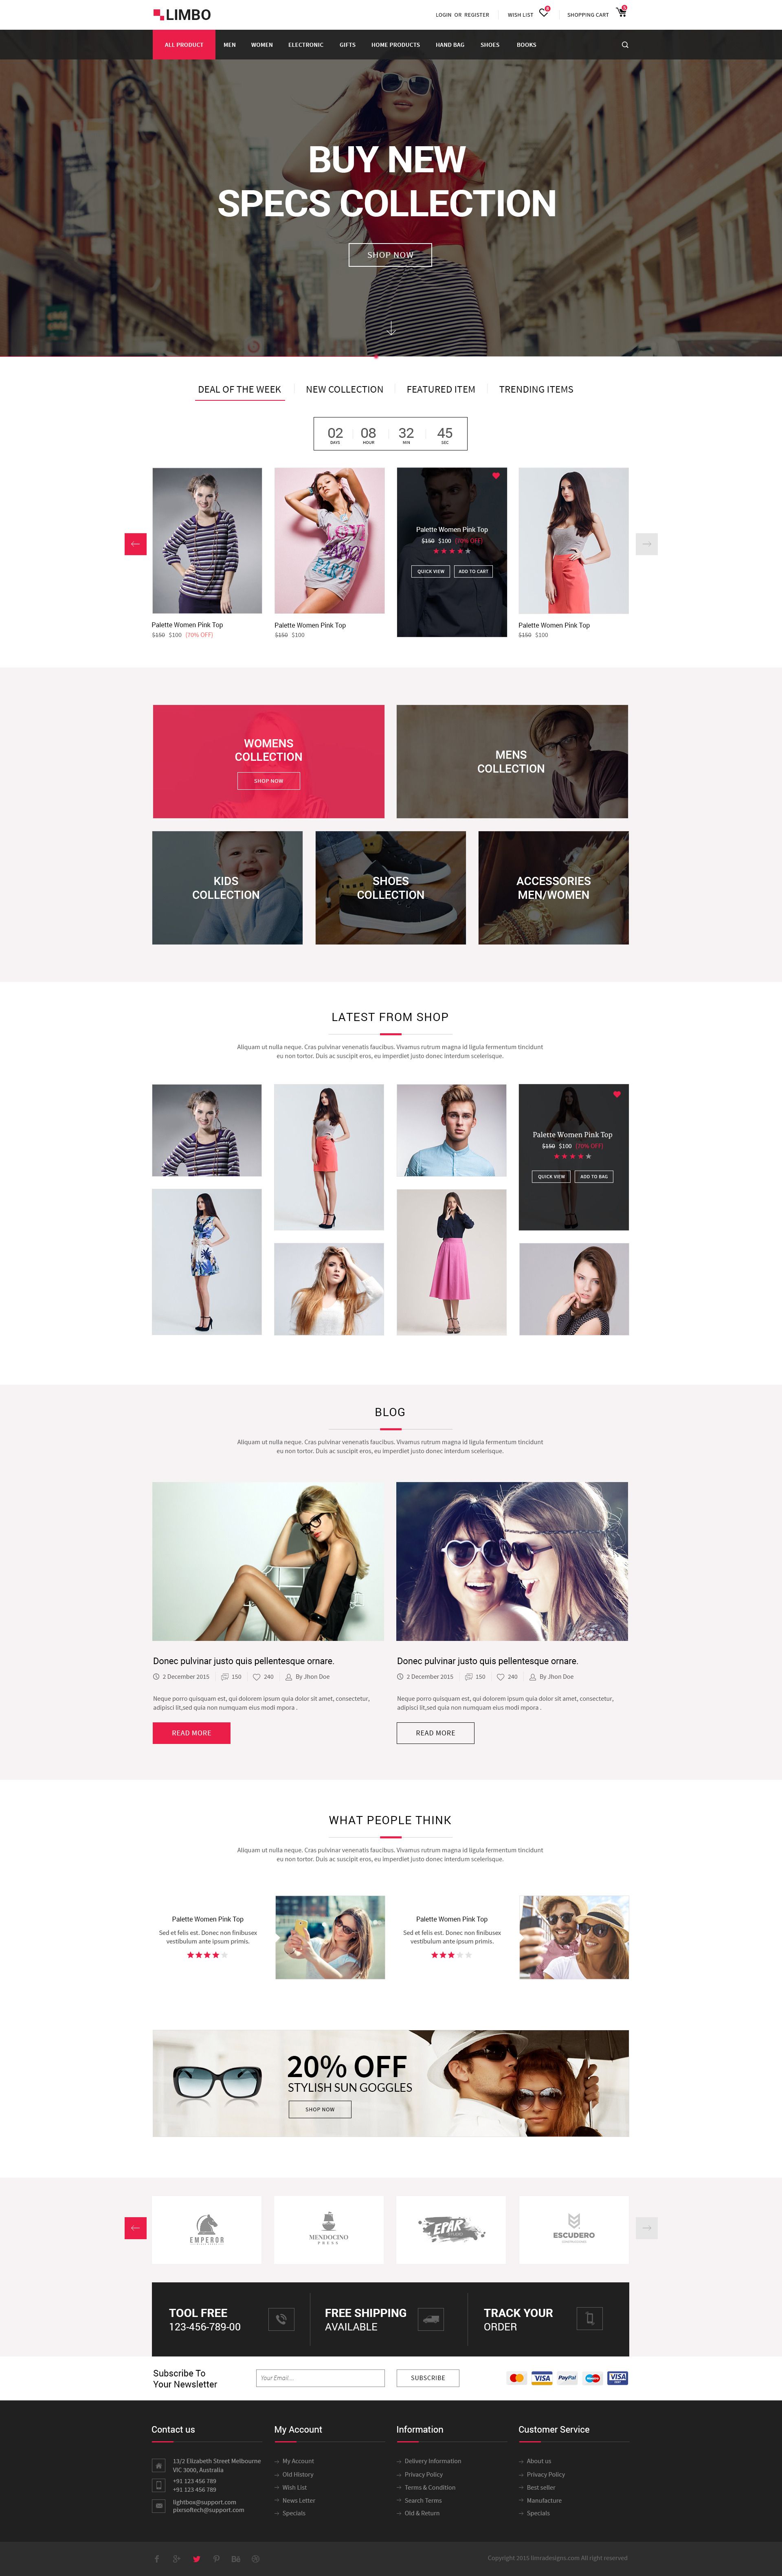 Limbo eCommerce PSD Template by momo_designs | ThemeForest